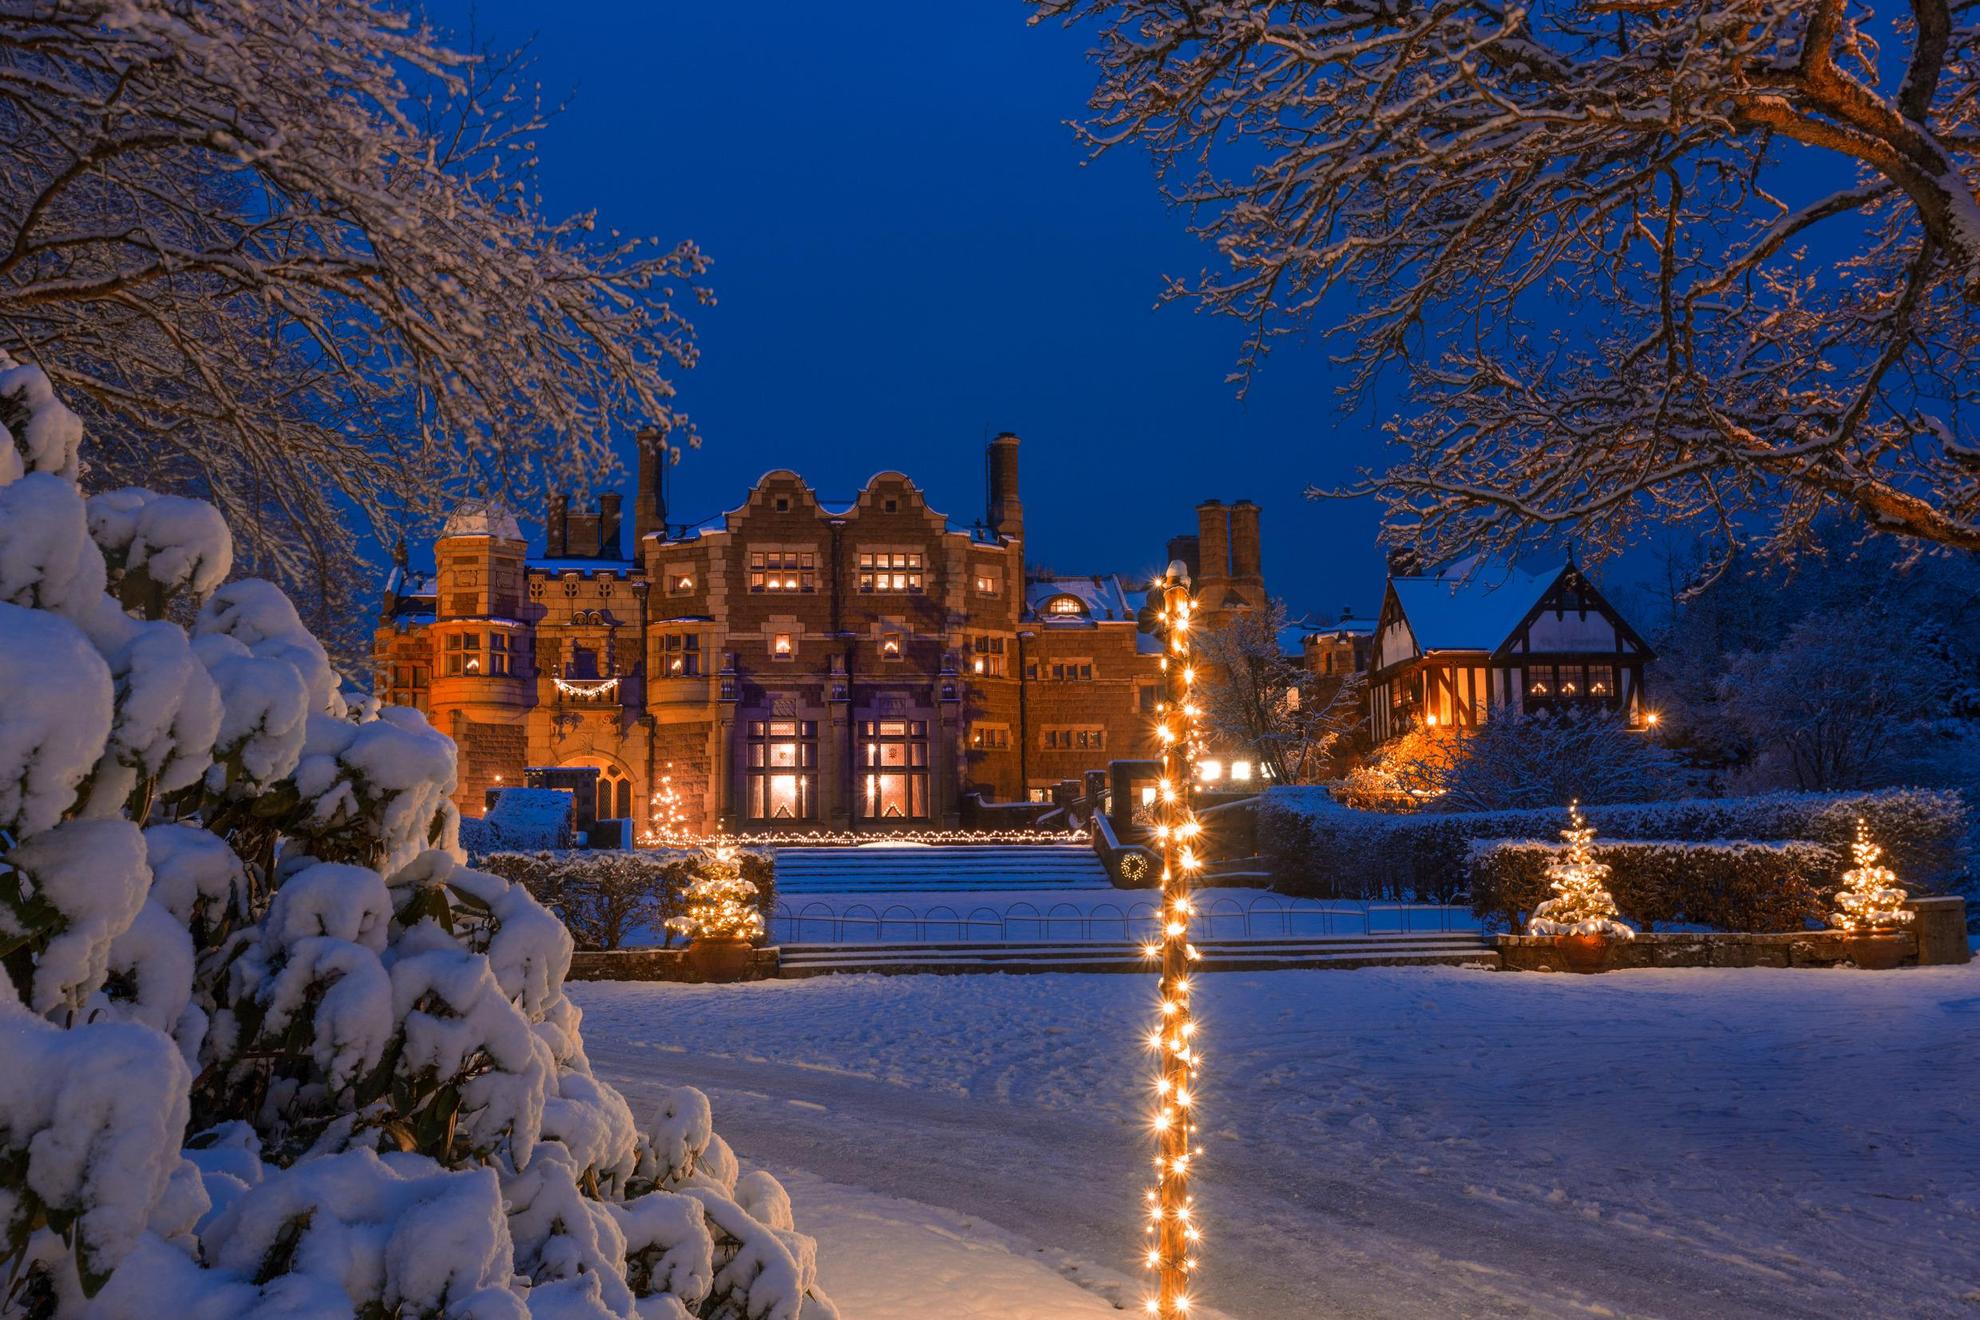 A castle covered in snow and Christmas lights at dusk.